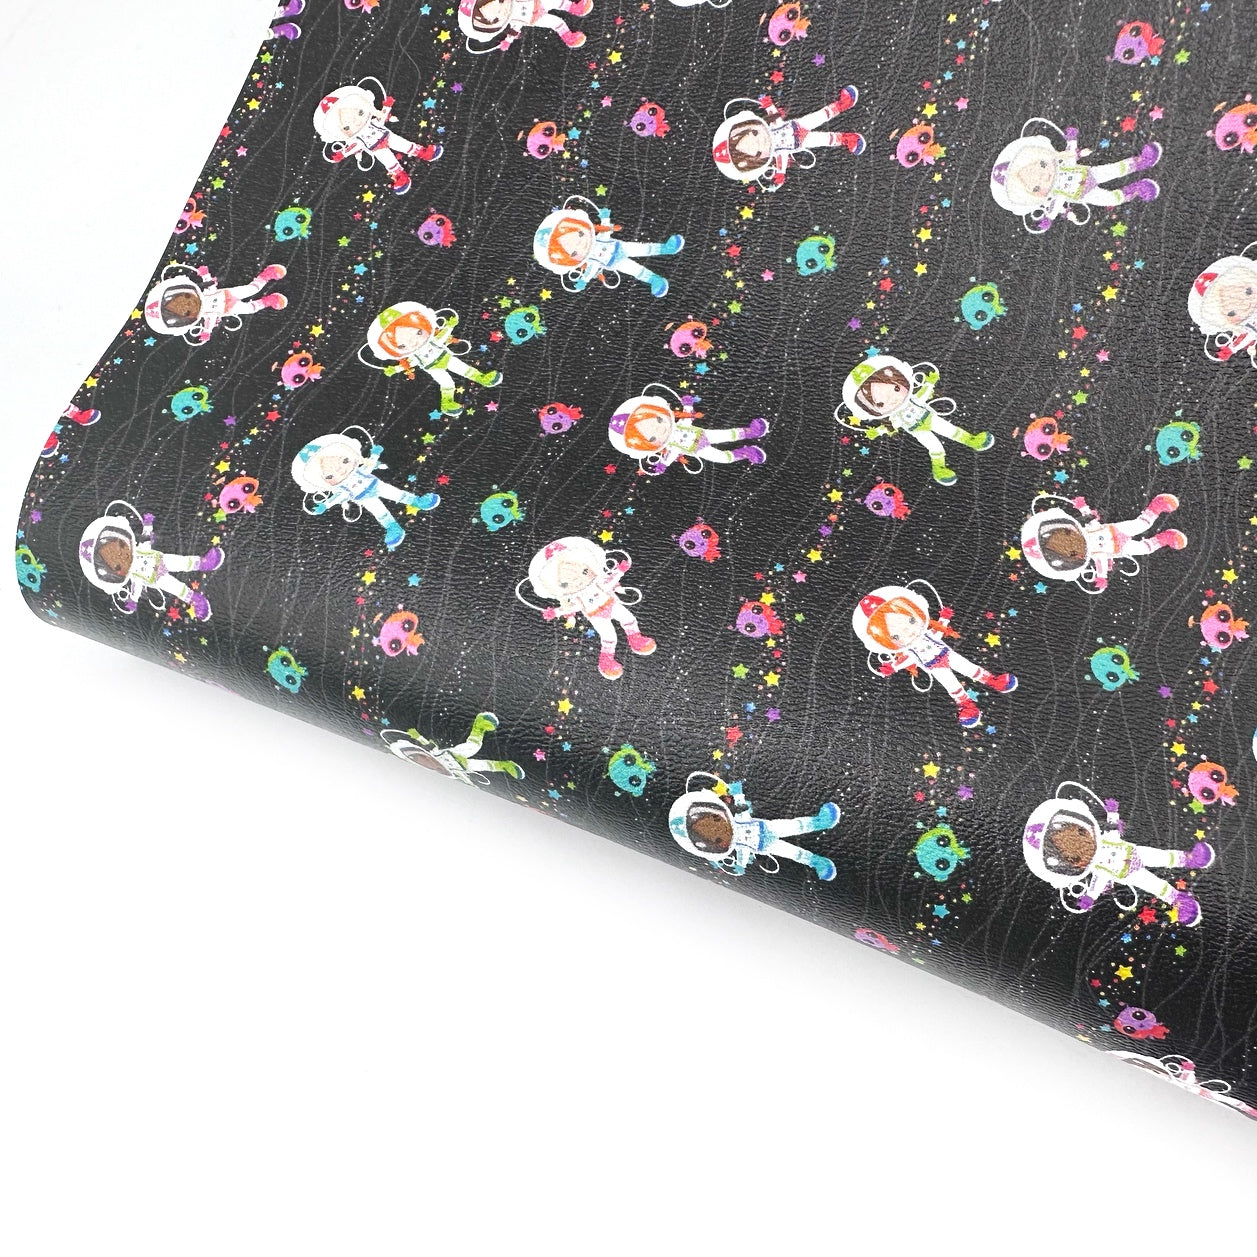 Space Girls Premium Faux Leather Fabric Sheets